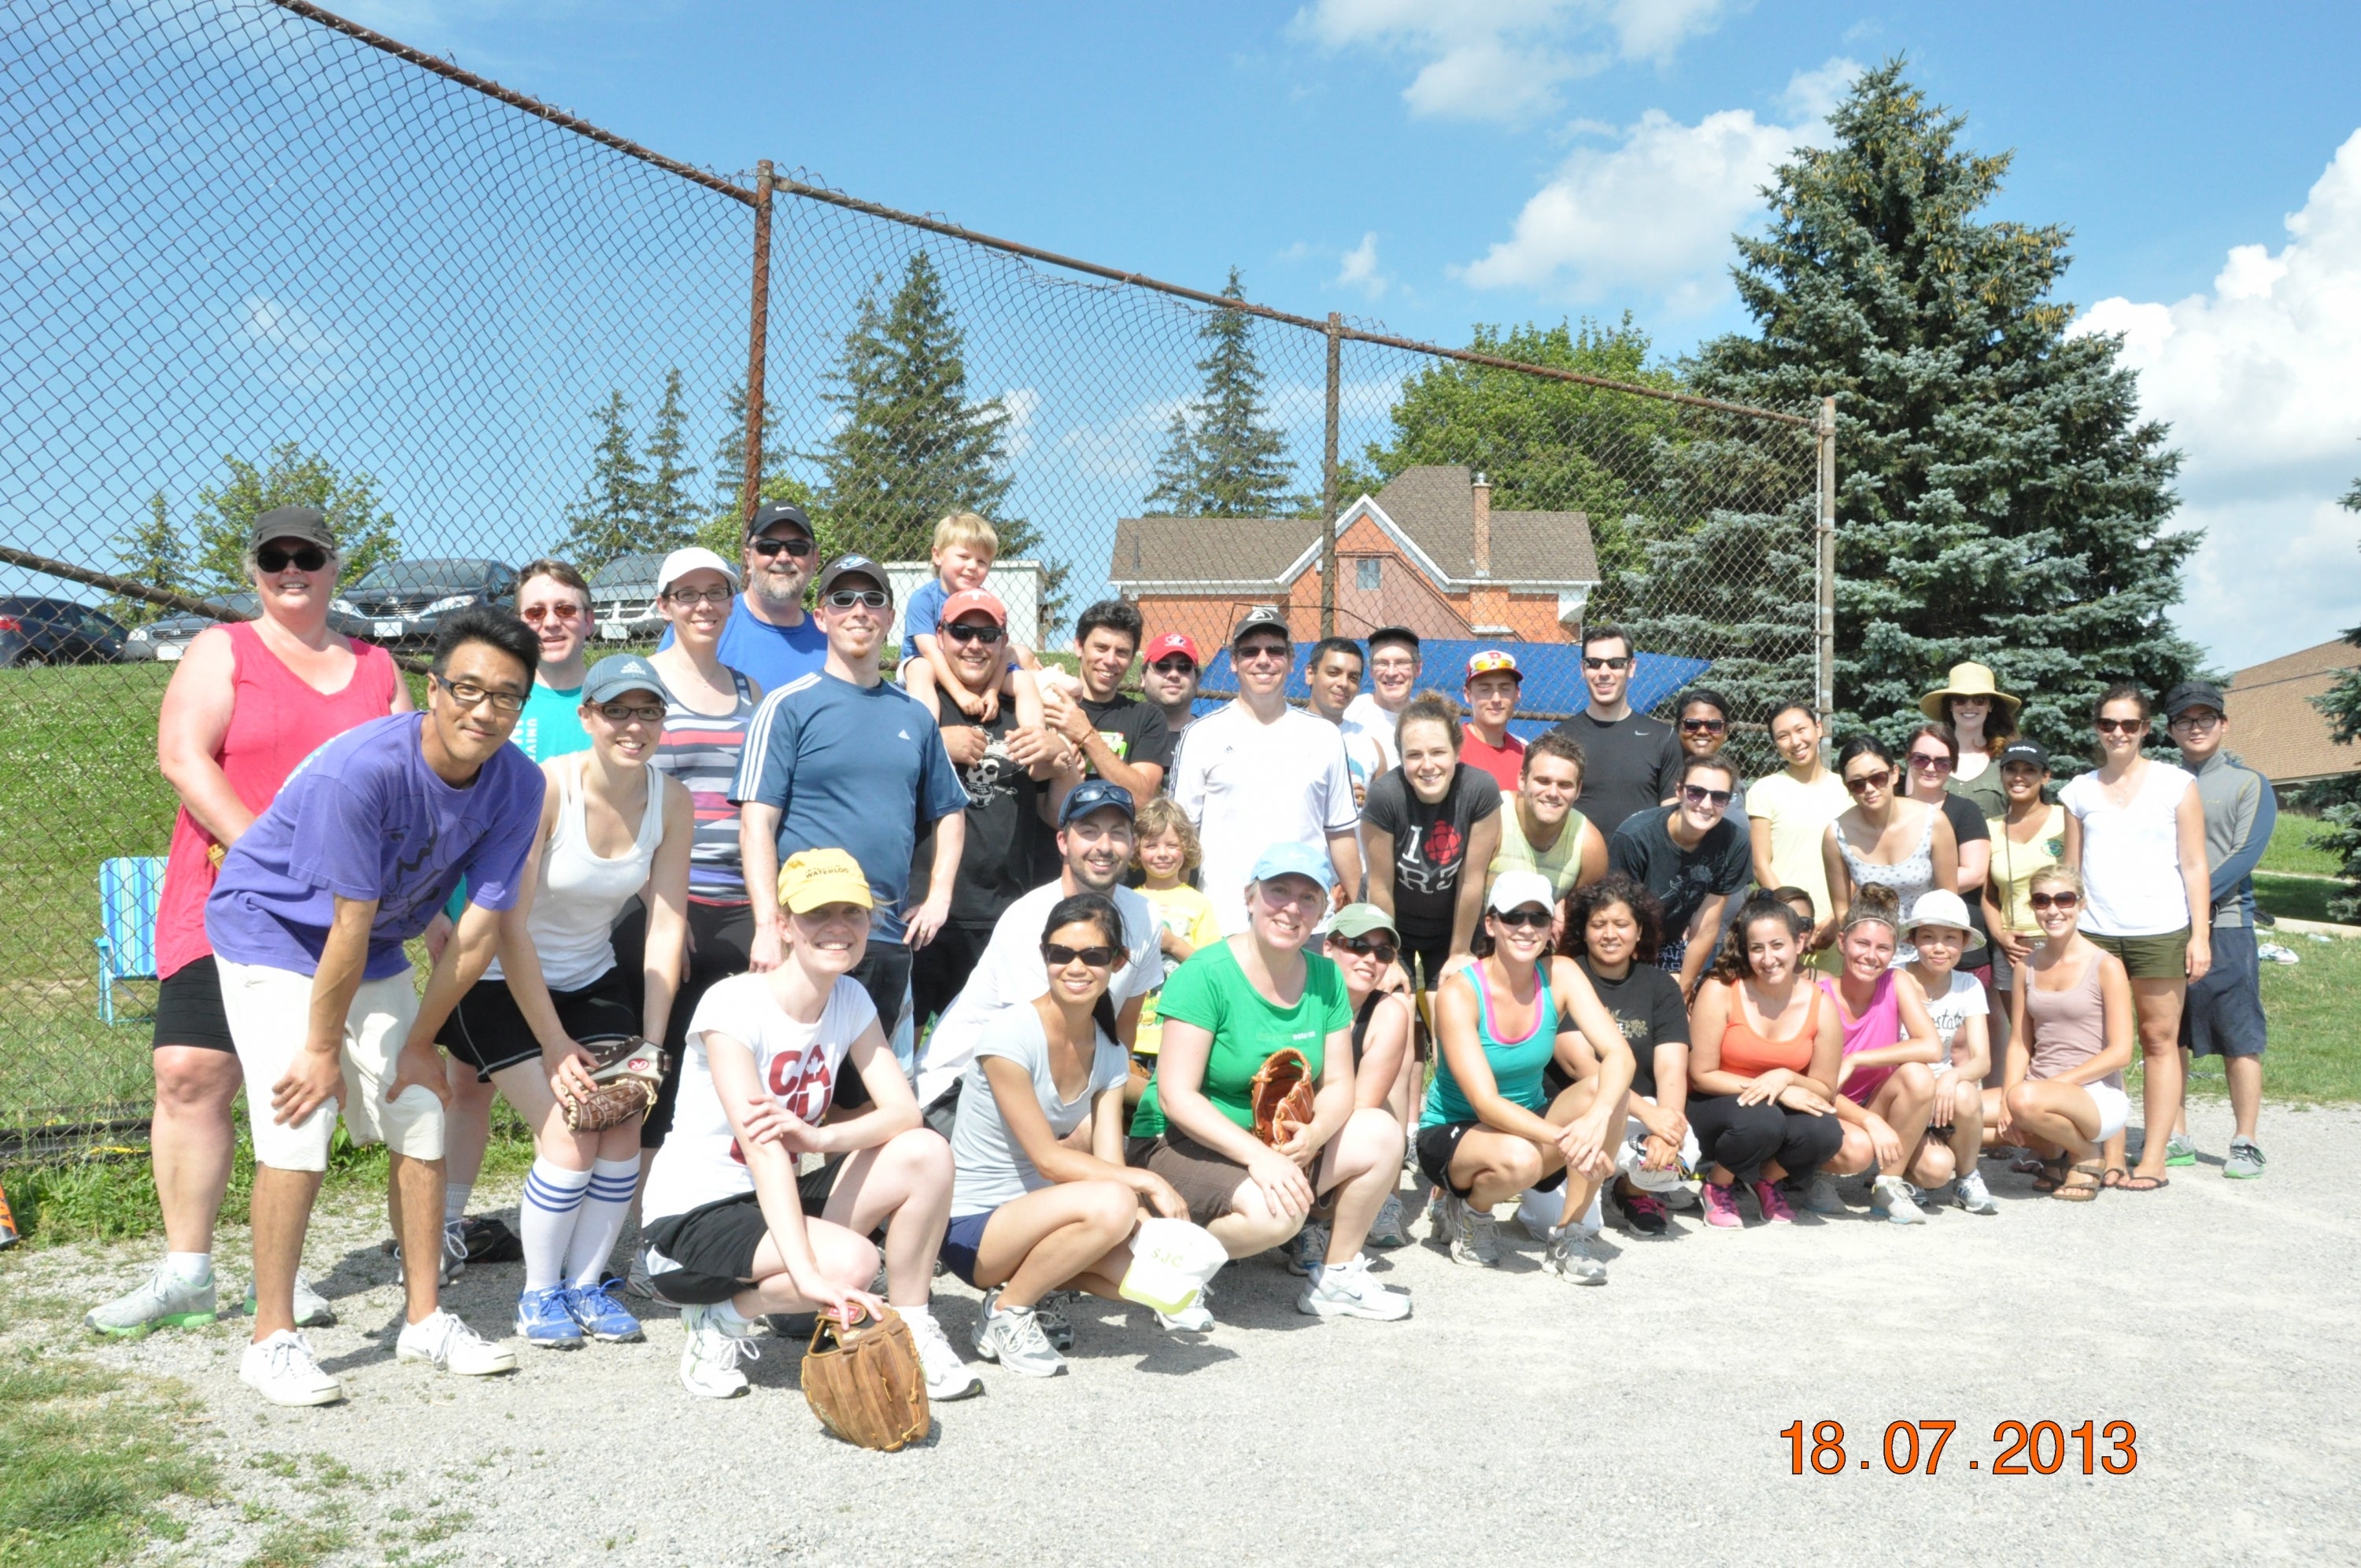 Group picture from 2013 Softball Game